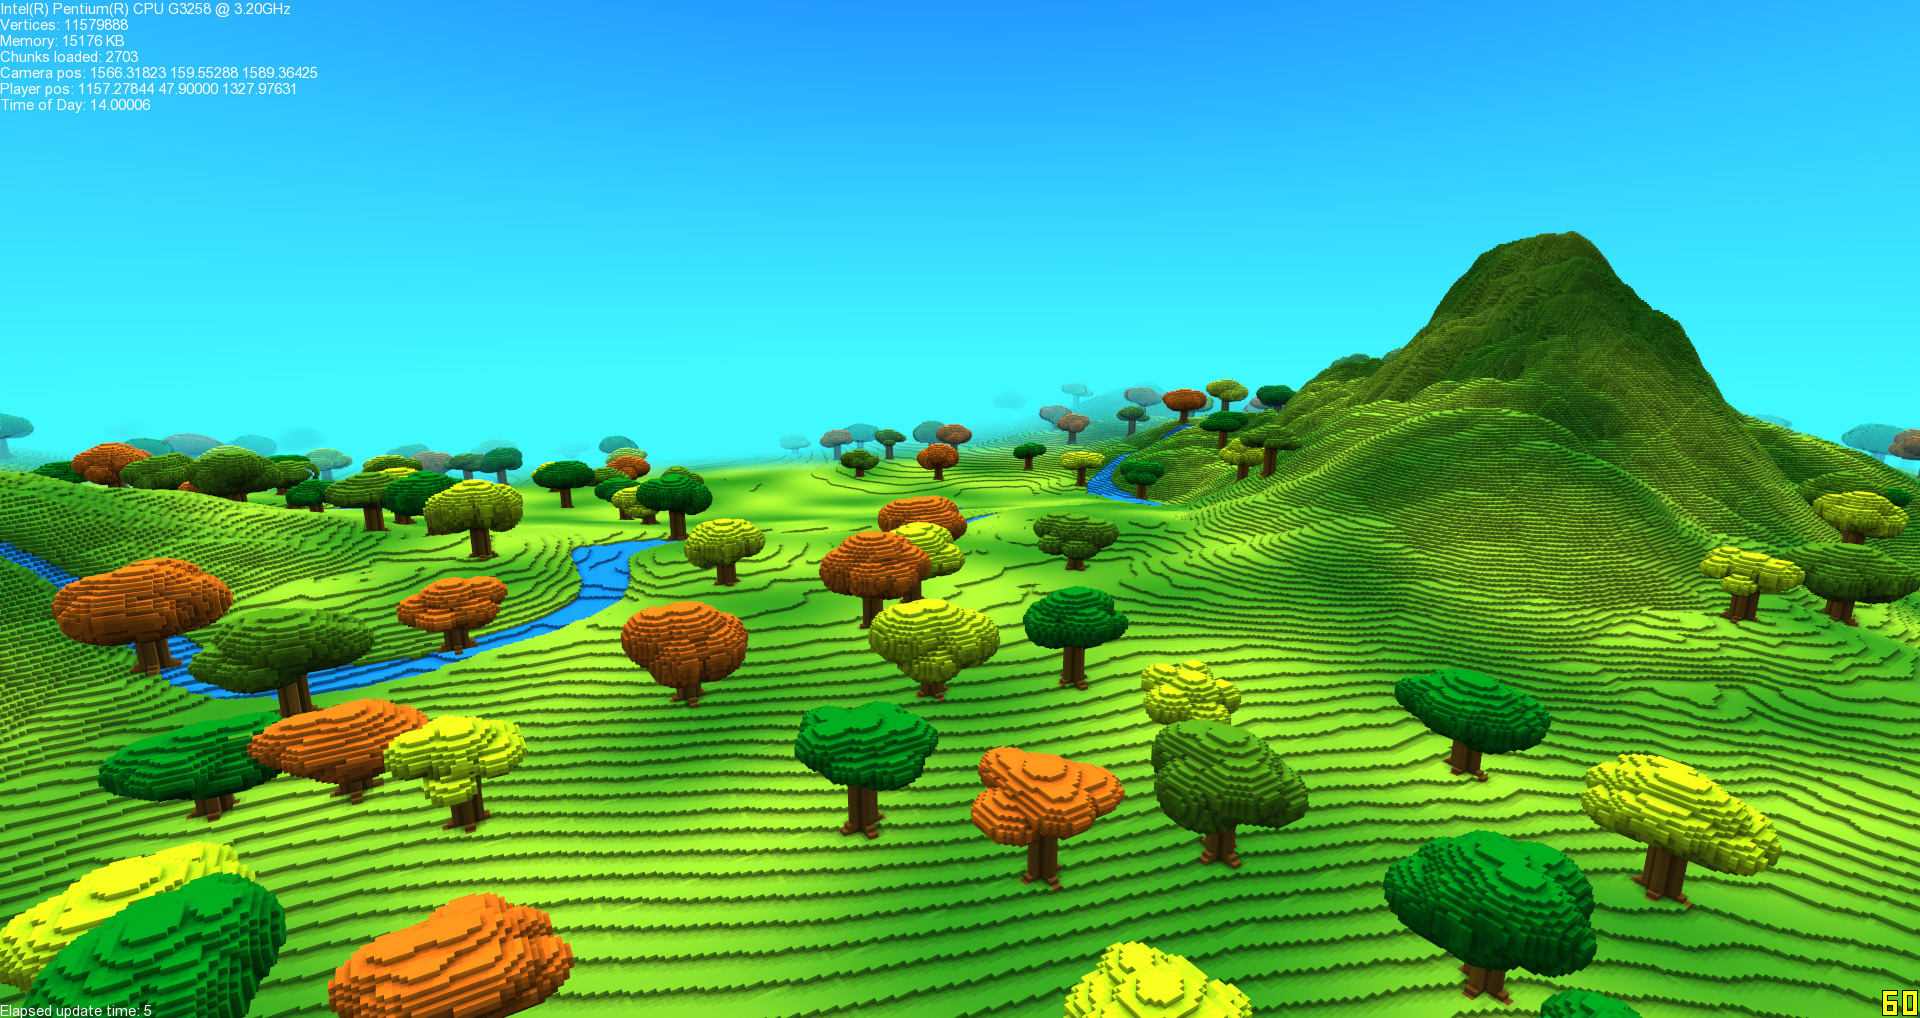 Adding Biomes and Rivers